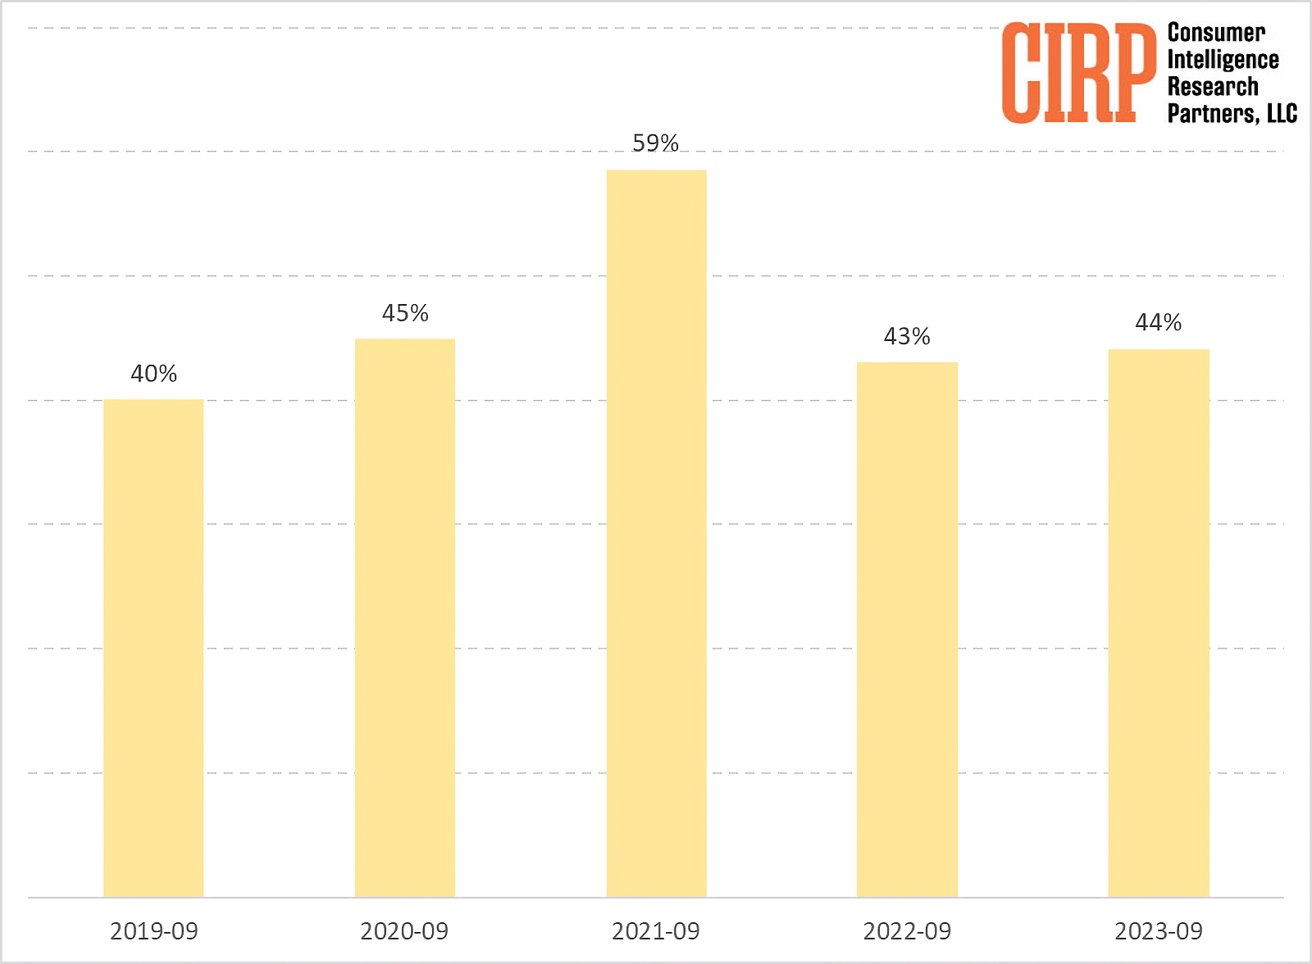 A bar chart displaying percentages over time, with bars for 2019-09 (40%), 2020-09 (45%), 2021-09 (59%), 2022-09 (43%), and 2023-09 (44%). The chart is labeled with the logo of Consumer Intelligence Research Partners, LLC.